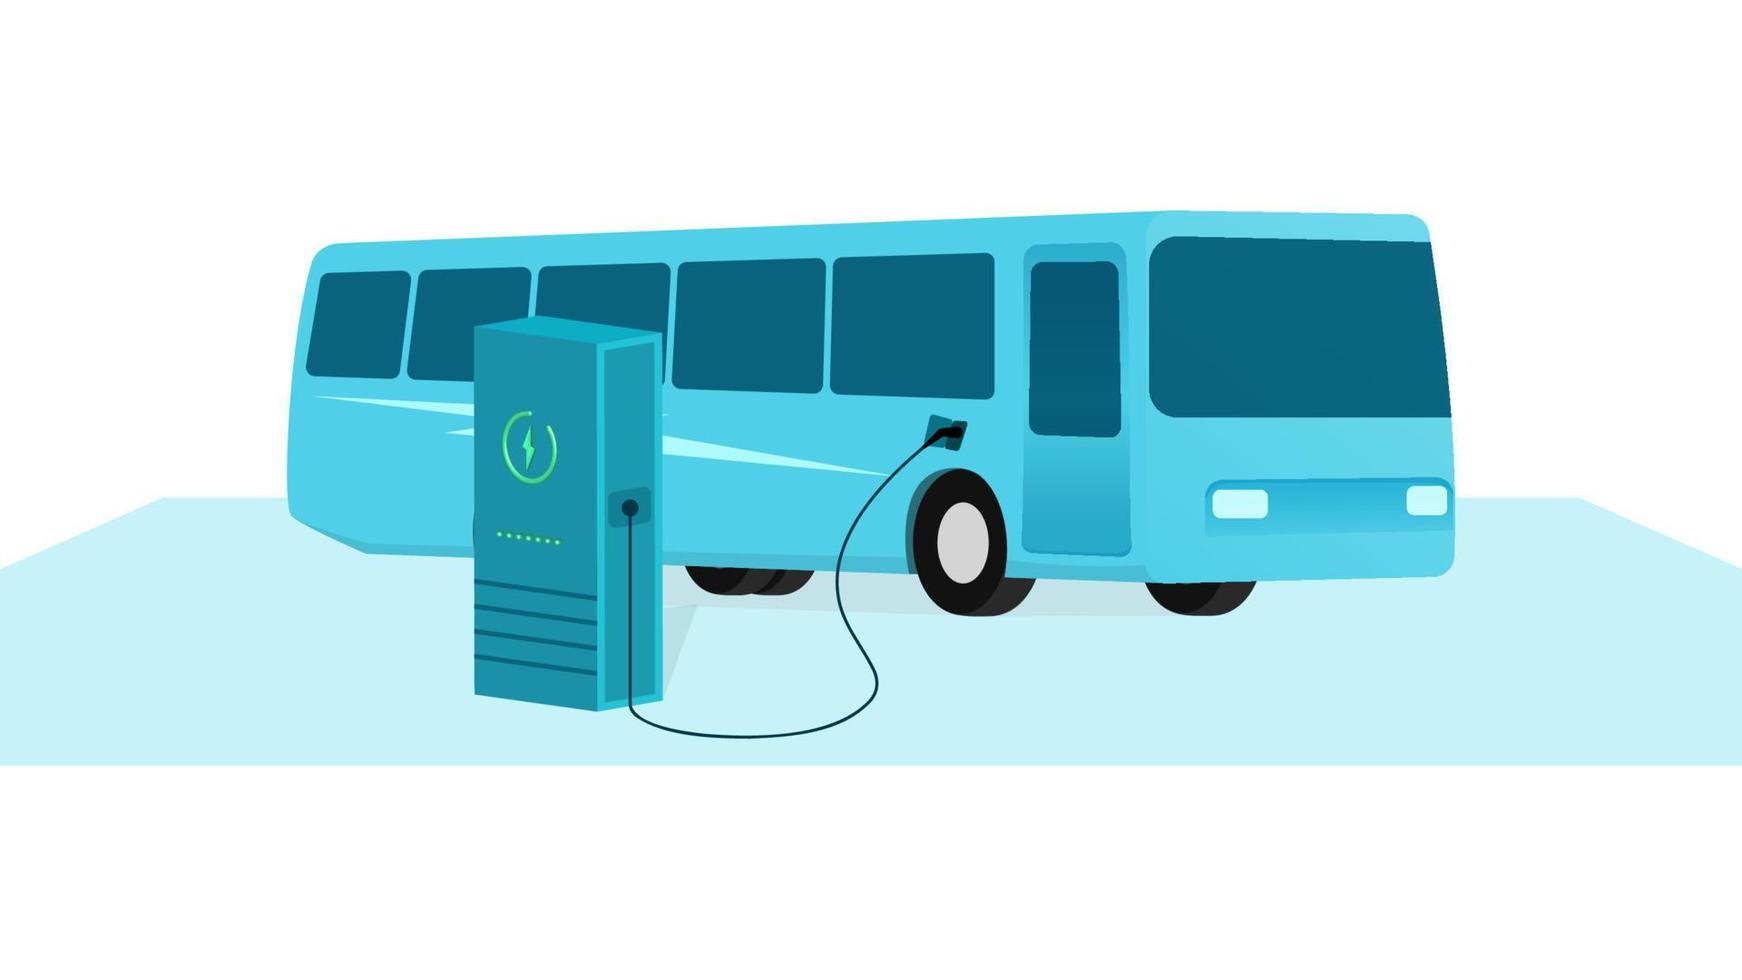 Public transport bus charging at electric vehicle charging station, vehicle at EV charge Point, business vector illustration on white background.